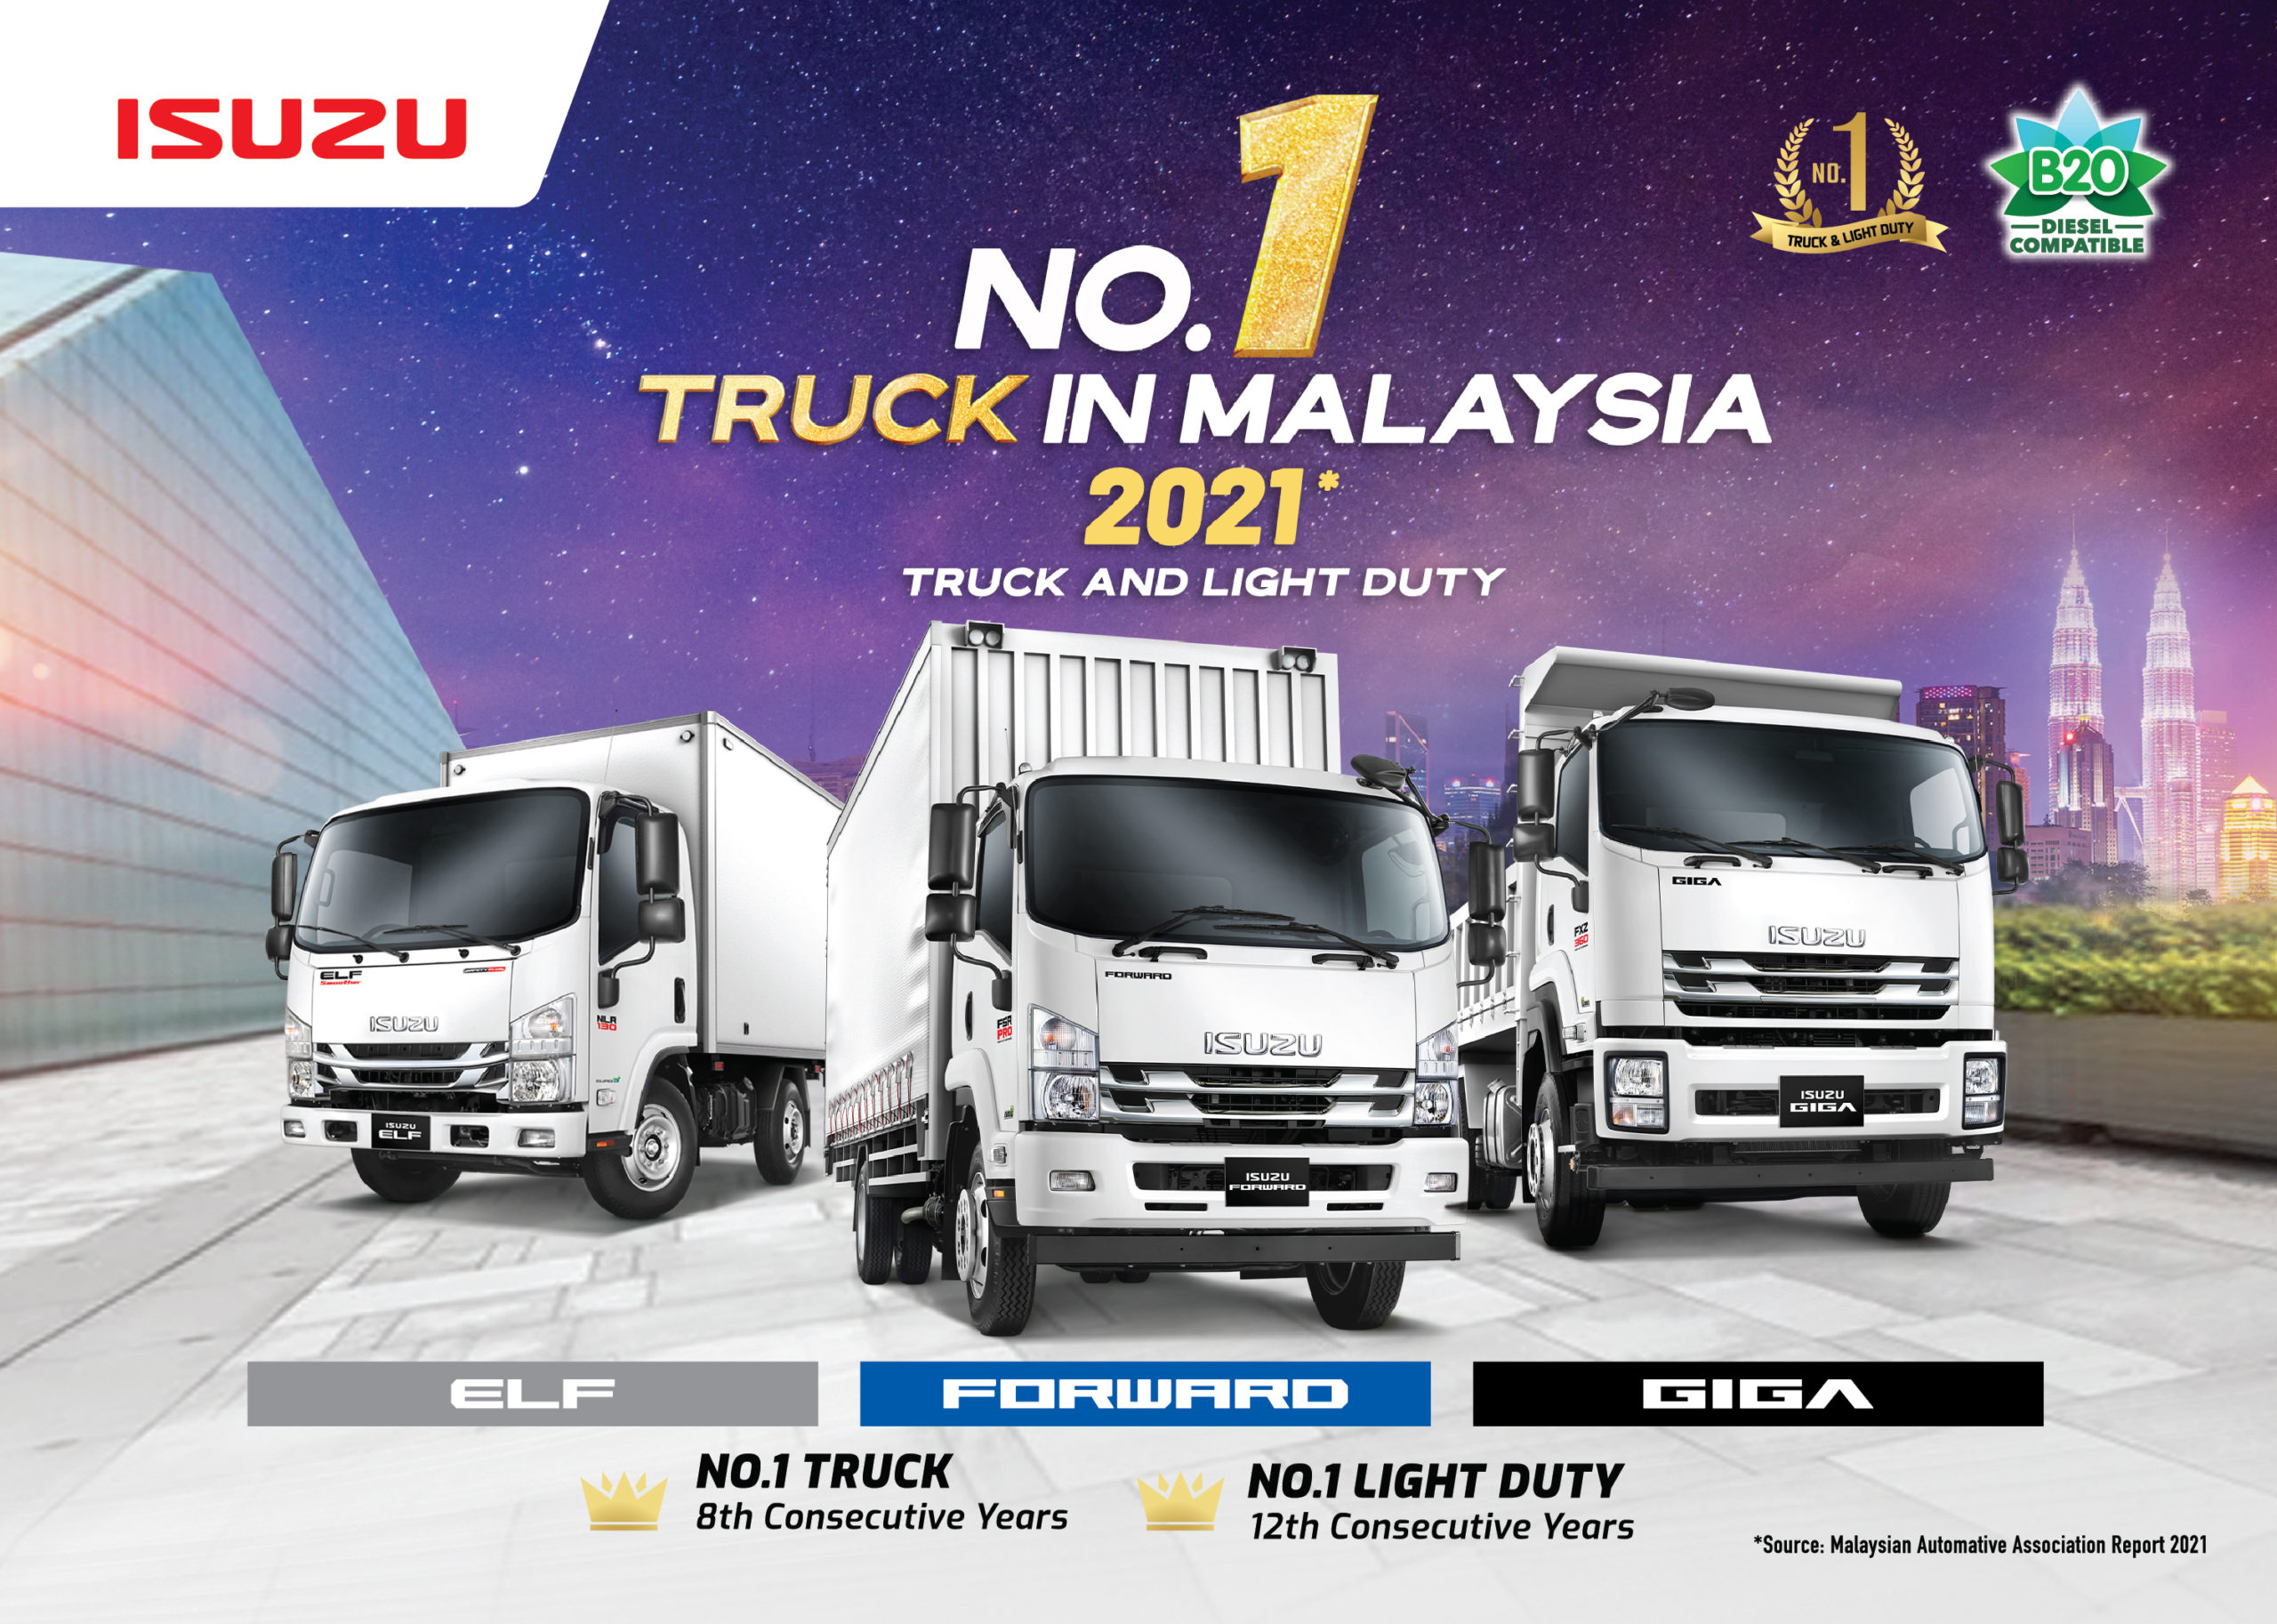 ISUZU RETAINS TOP TITLES AS MALAYSIA’S NO. 1 TRUCK AND LIGHT-DUTY TRUCK BRAND FOR YEAR 2021